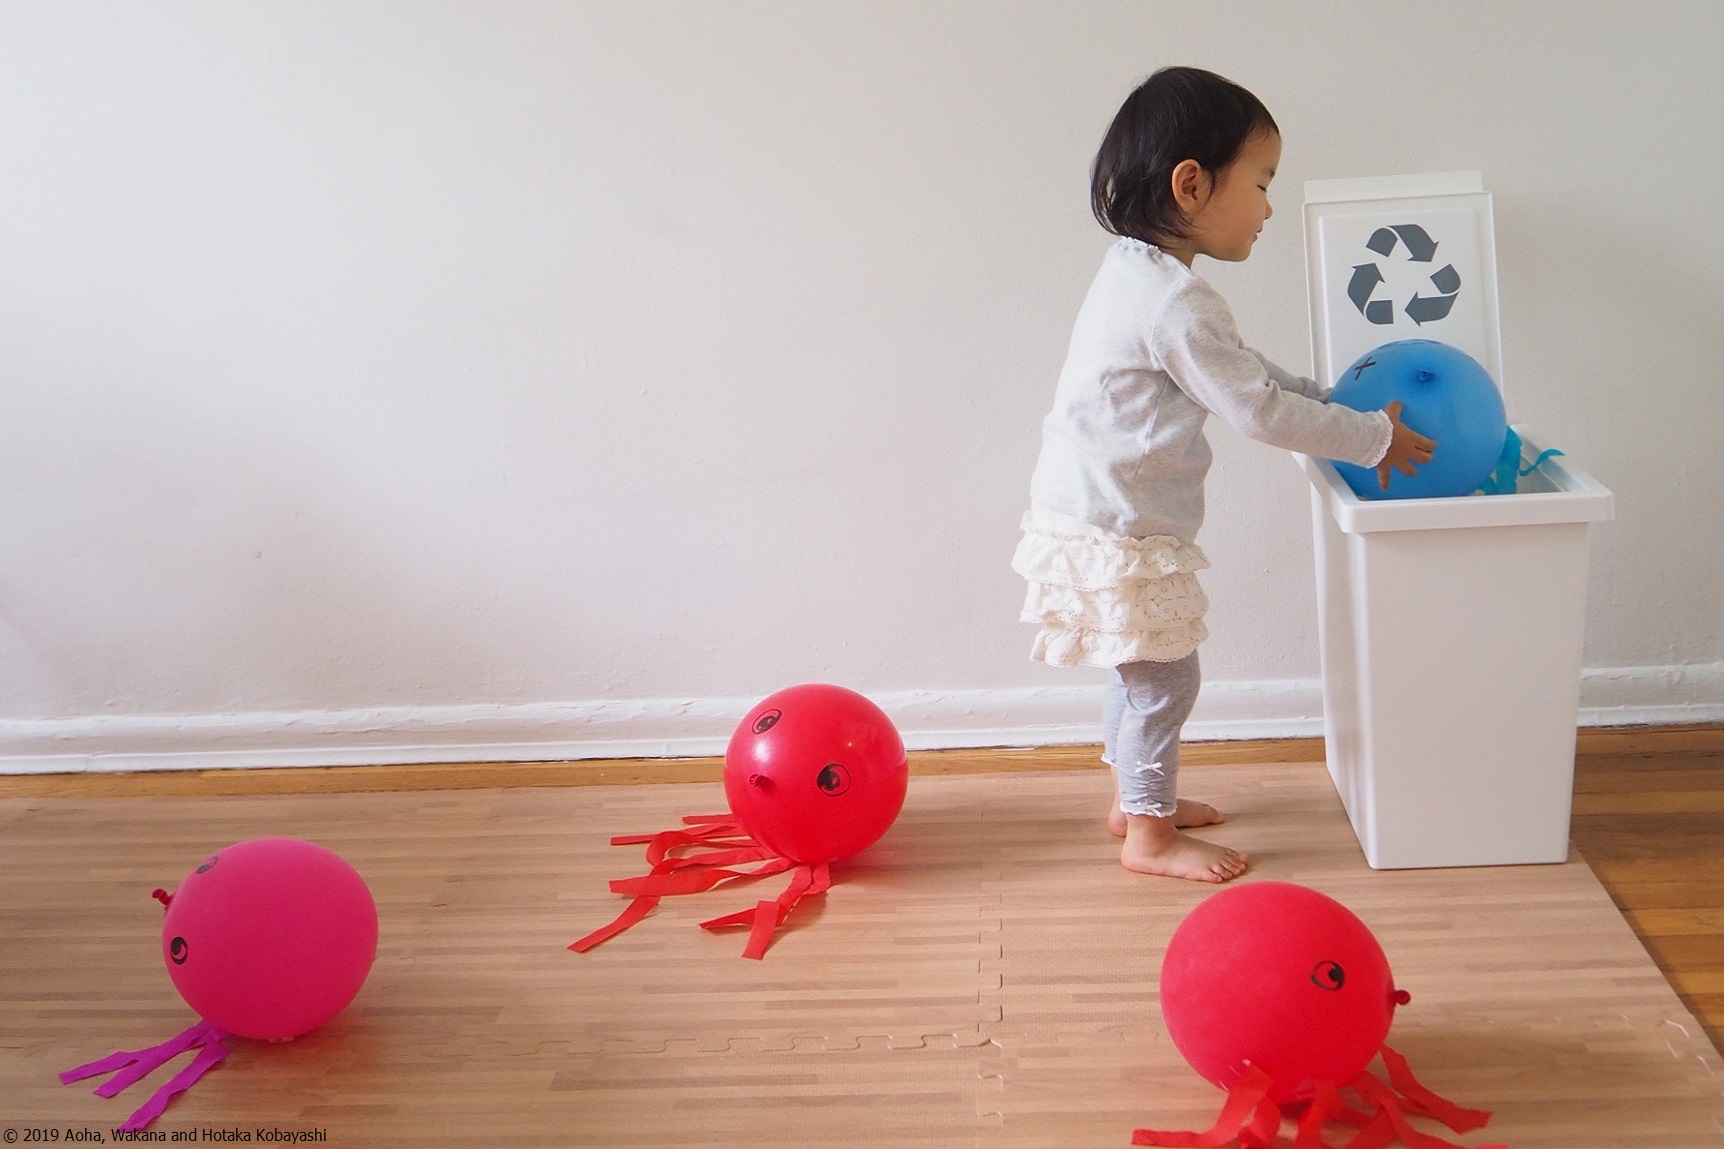 A little girl places a blue, octopus-shaped balloon into a recycling bin while red balloons rest on the floor.